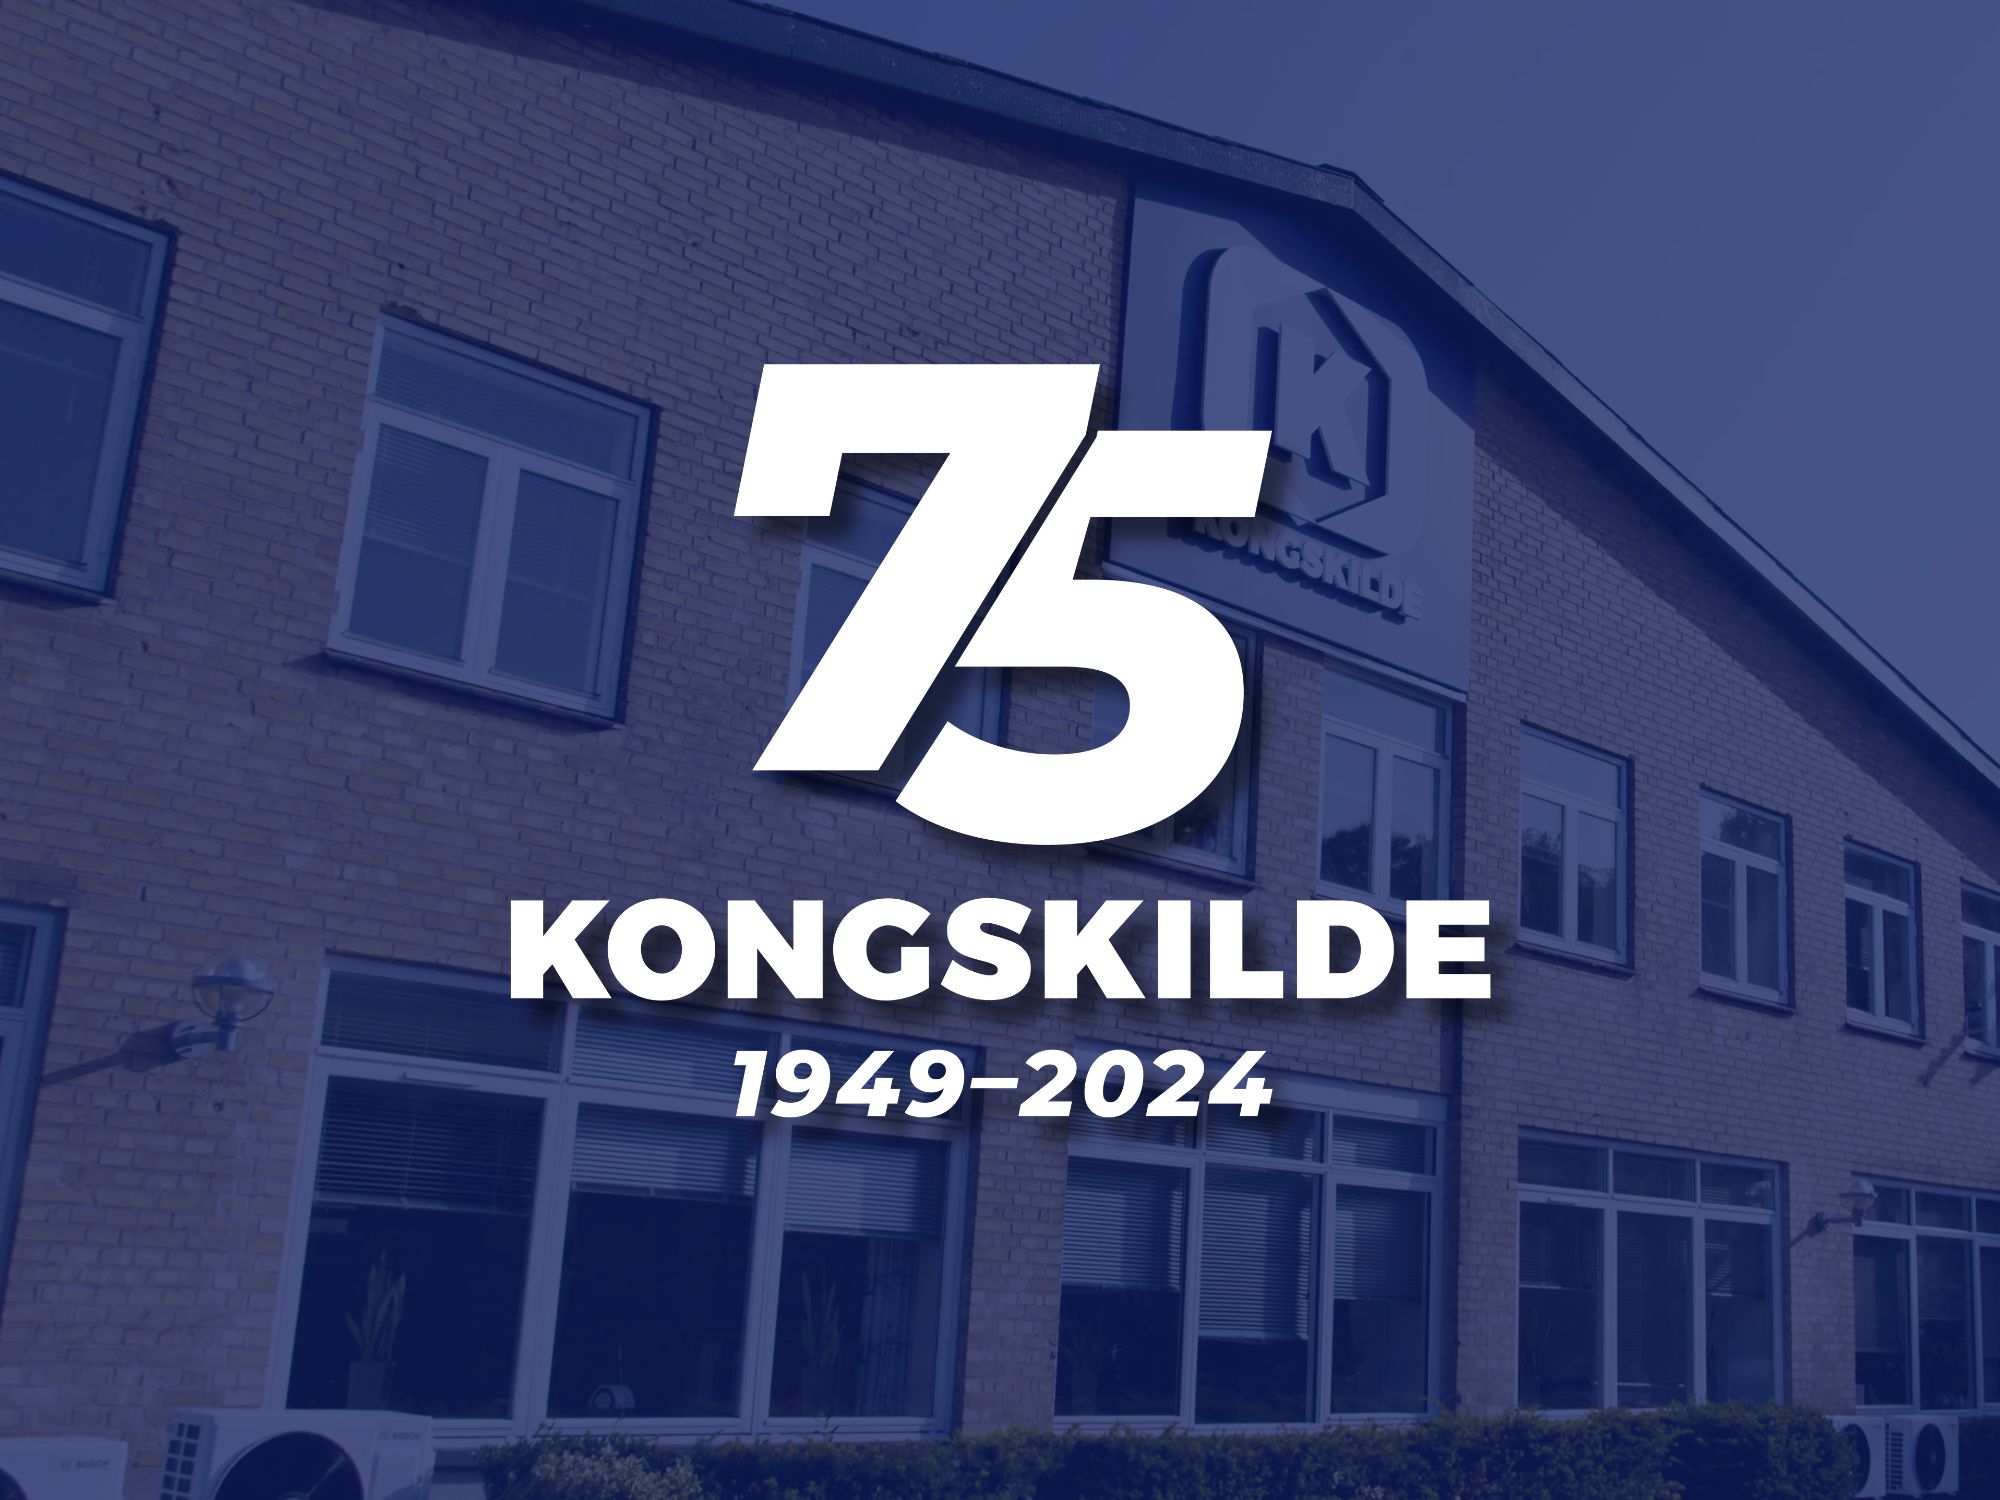 Celebrating 75 Years of Excellence